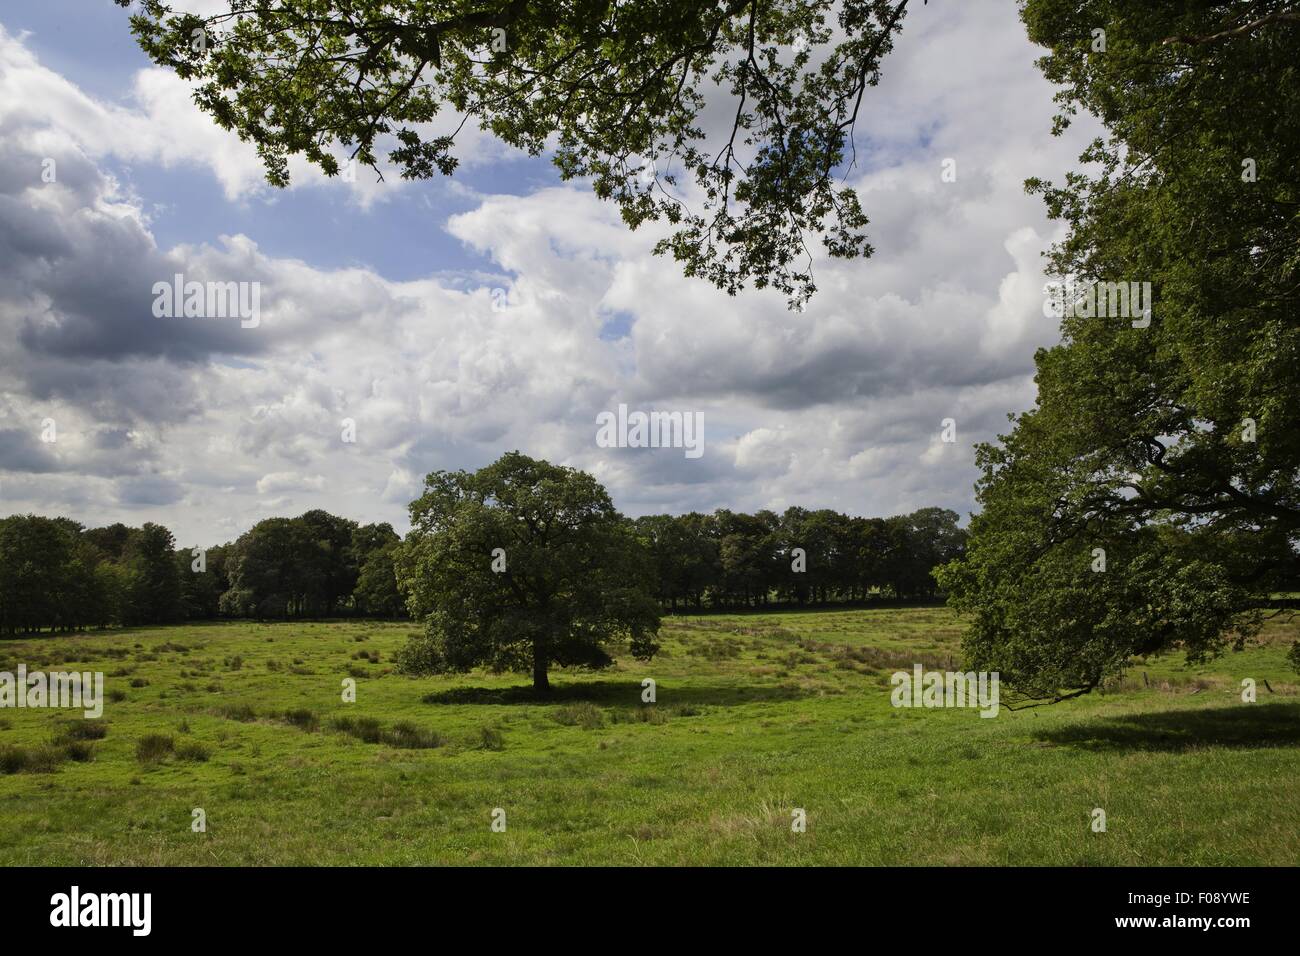 Pasture land and trees in Worpswede, Germany Stock Photo